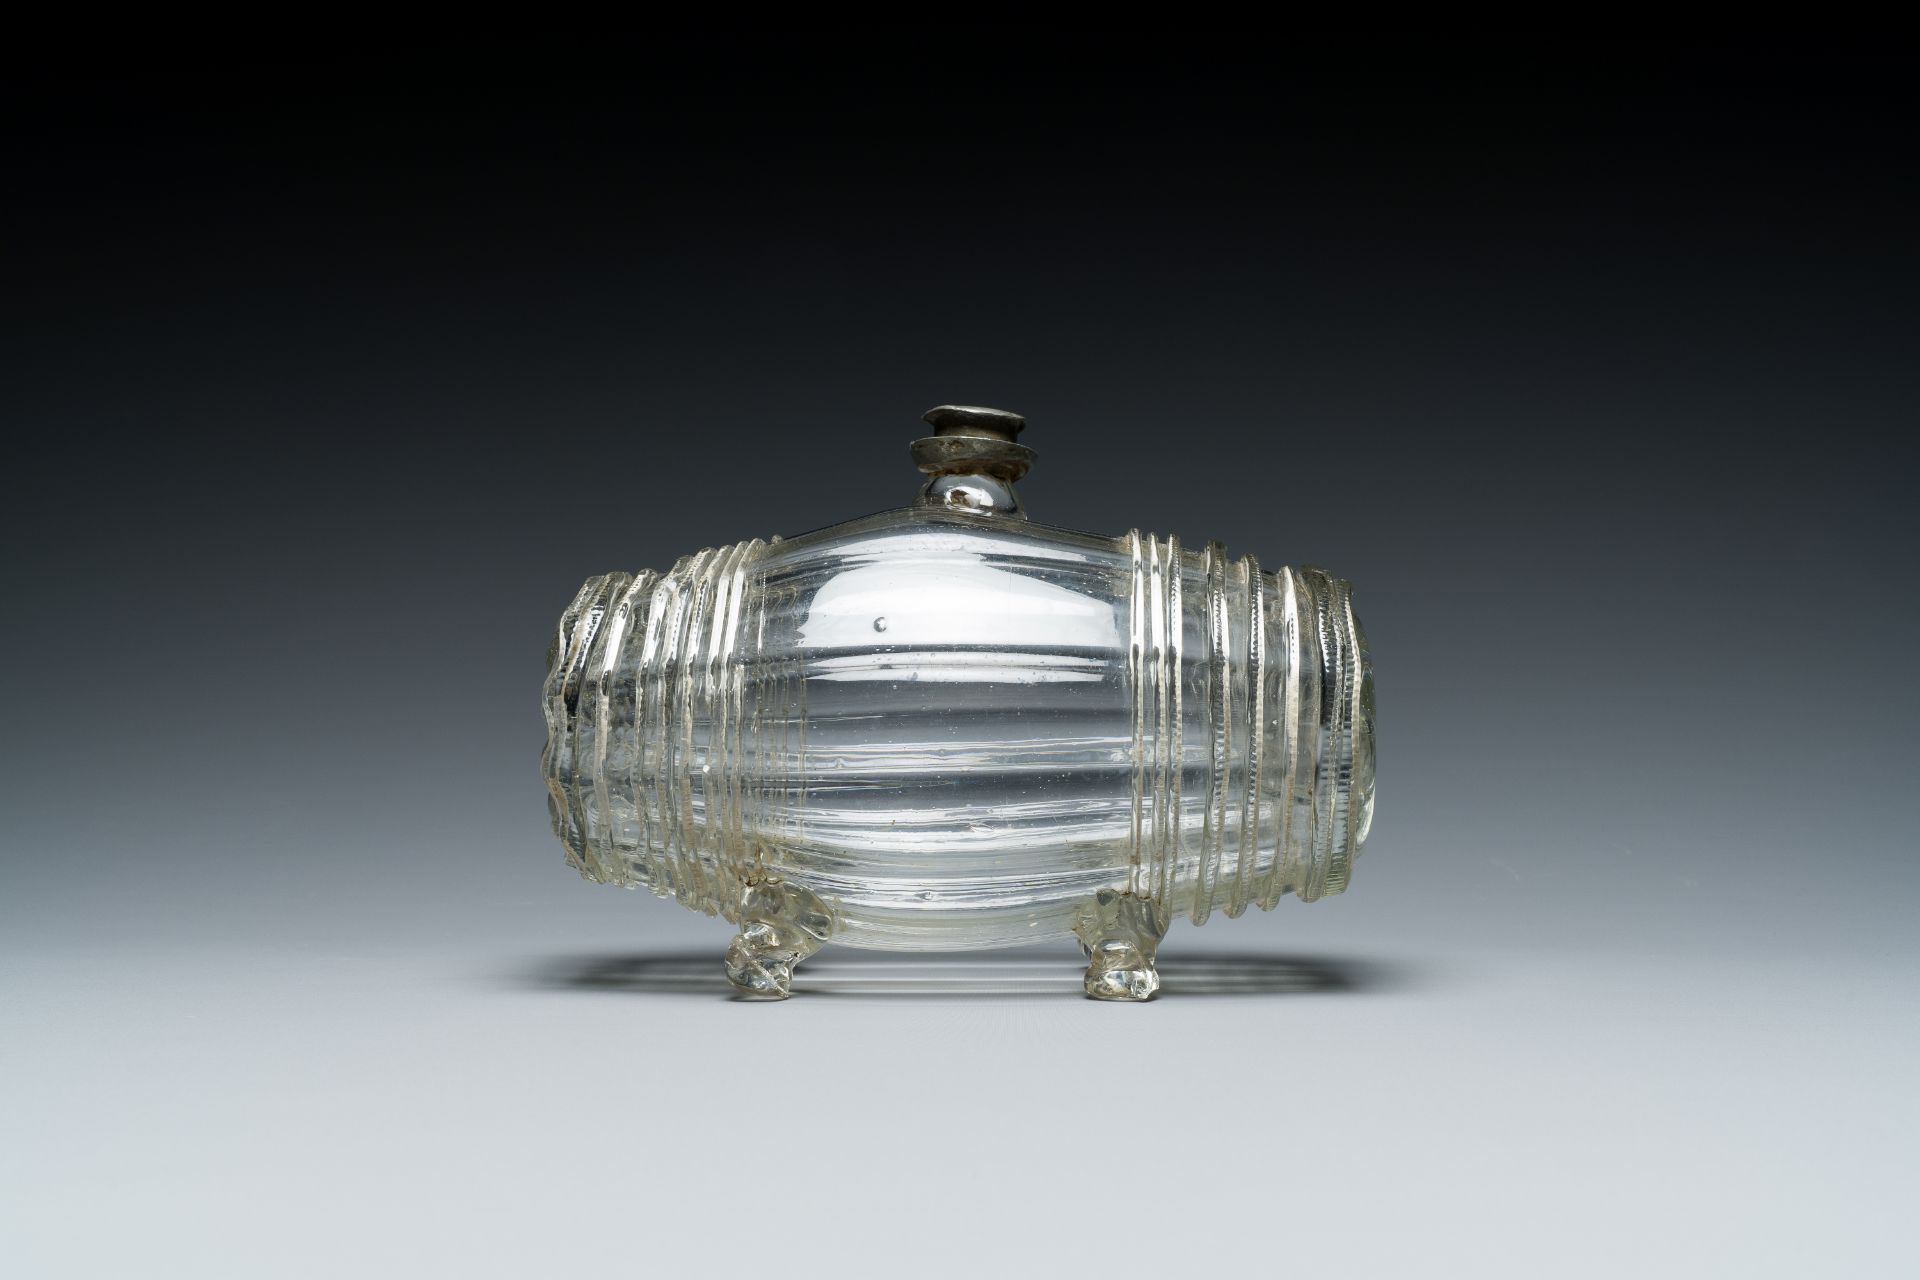 A German barrel-shaped glass bottle with pewter screw cap, 17/18th C. - Image 4 of 7